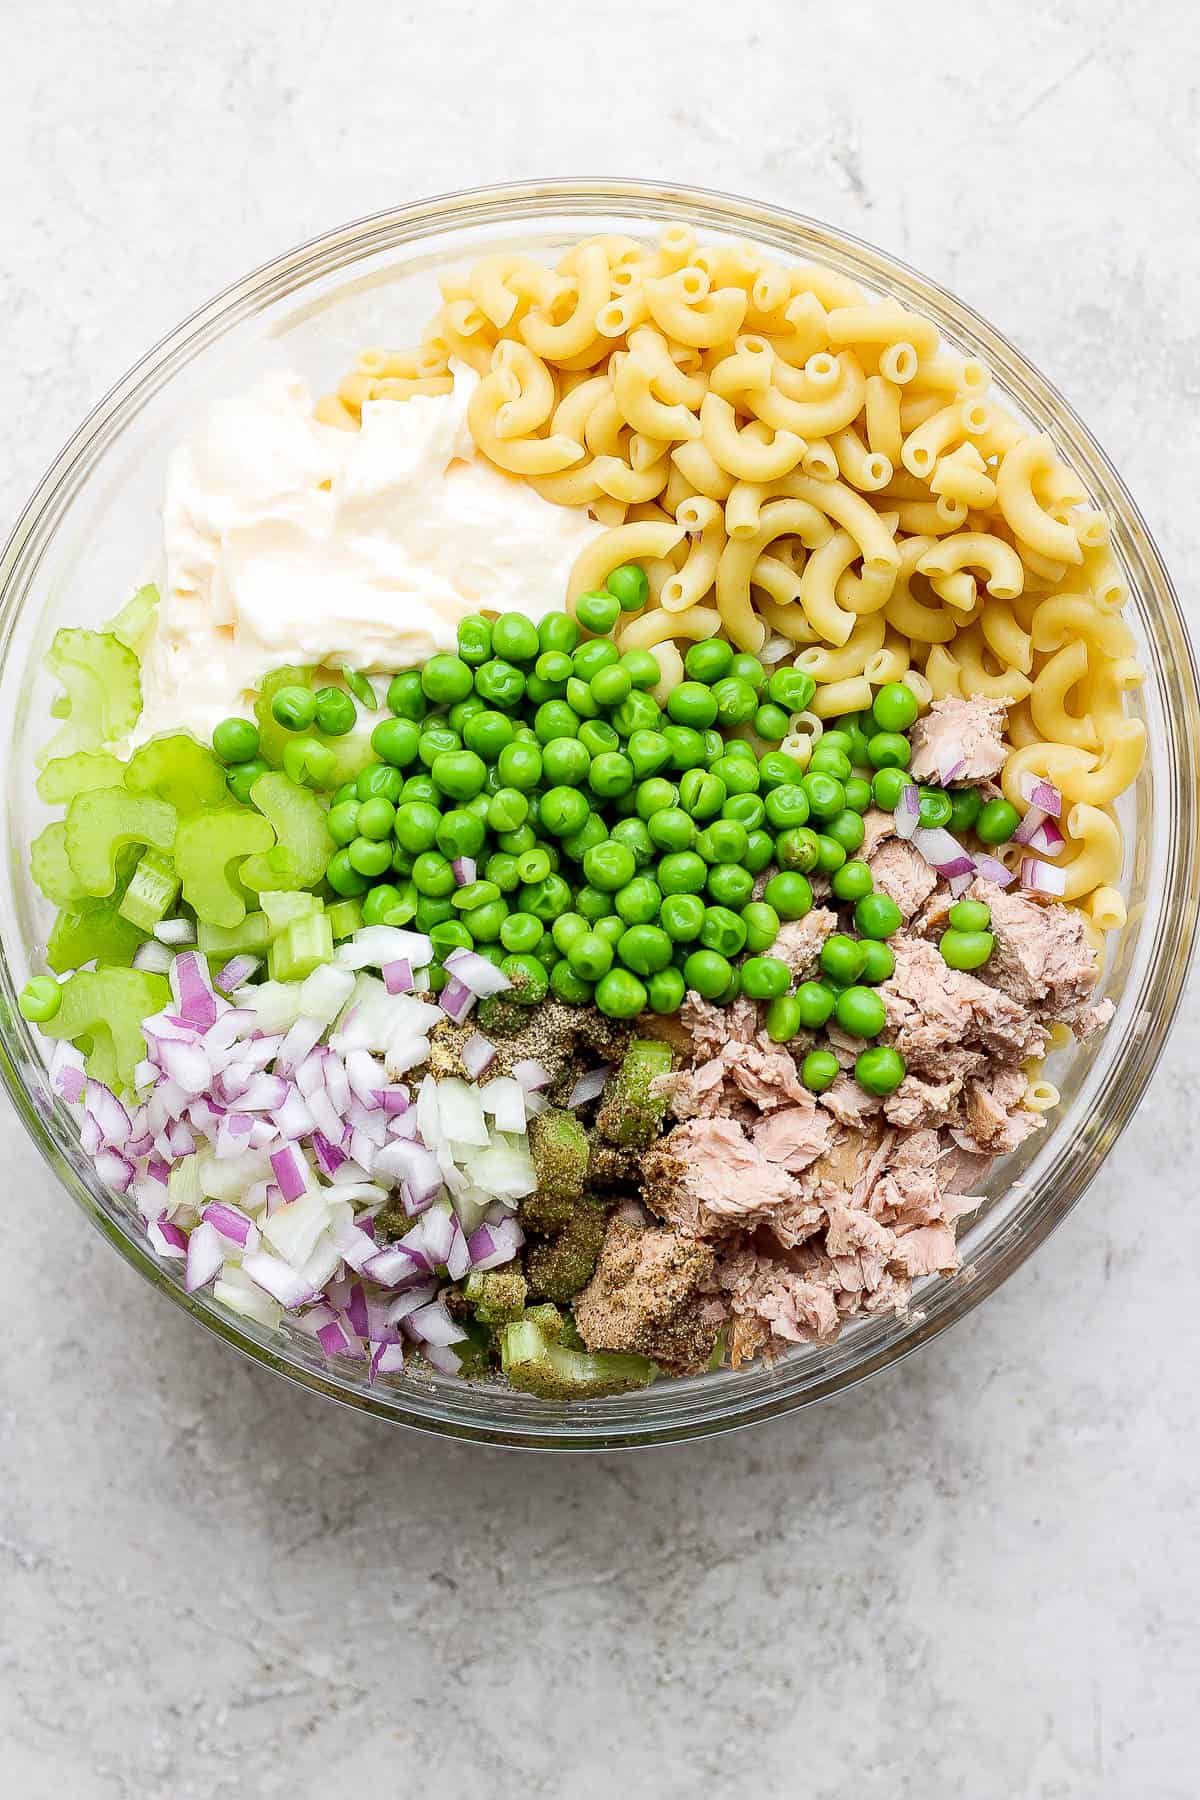 All of the tuna macaroni salad ingredients in a large glass bowl.